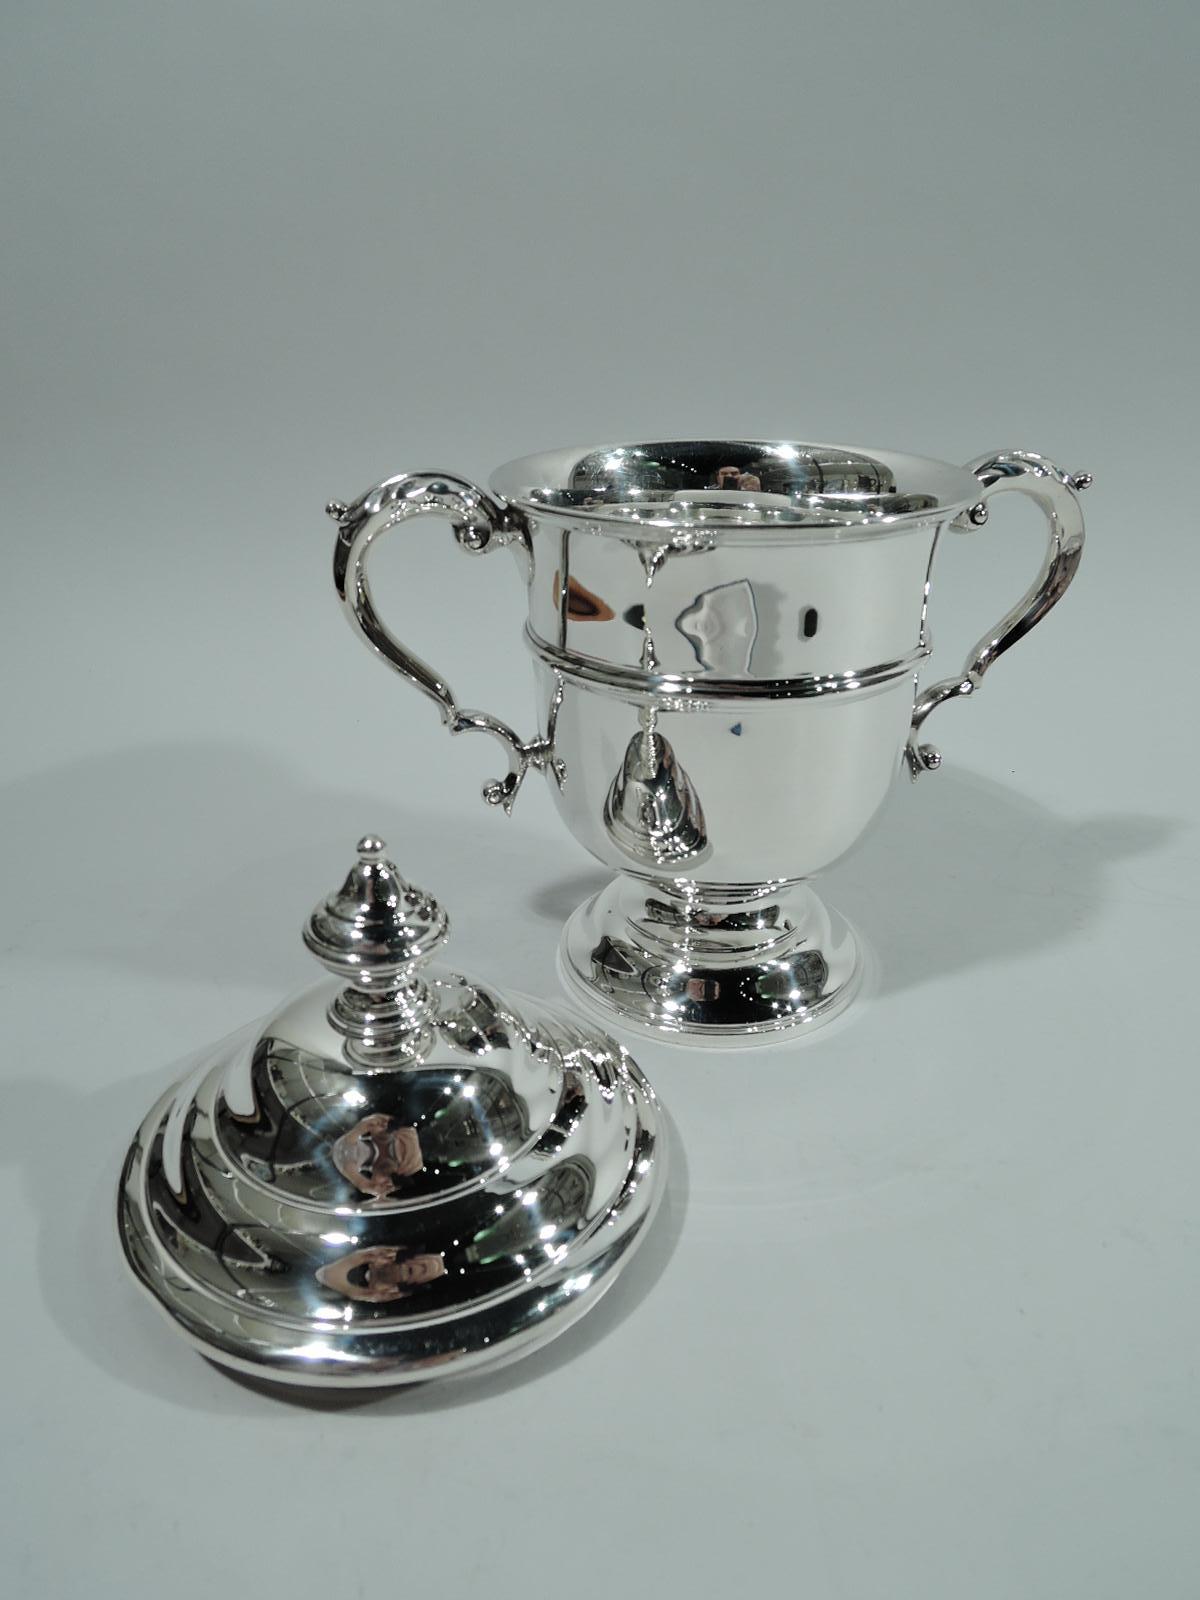 Edwardian classical sterling silver trophy cup. Made by Redlich in New York, ca 1920. Girdled urn with leaf-capped double-scroll side handles and domed foot. Cover double-domed with vasiform finial. Traditional form in a nice size with lots of room